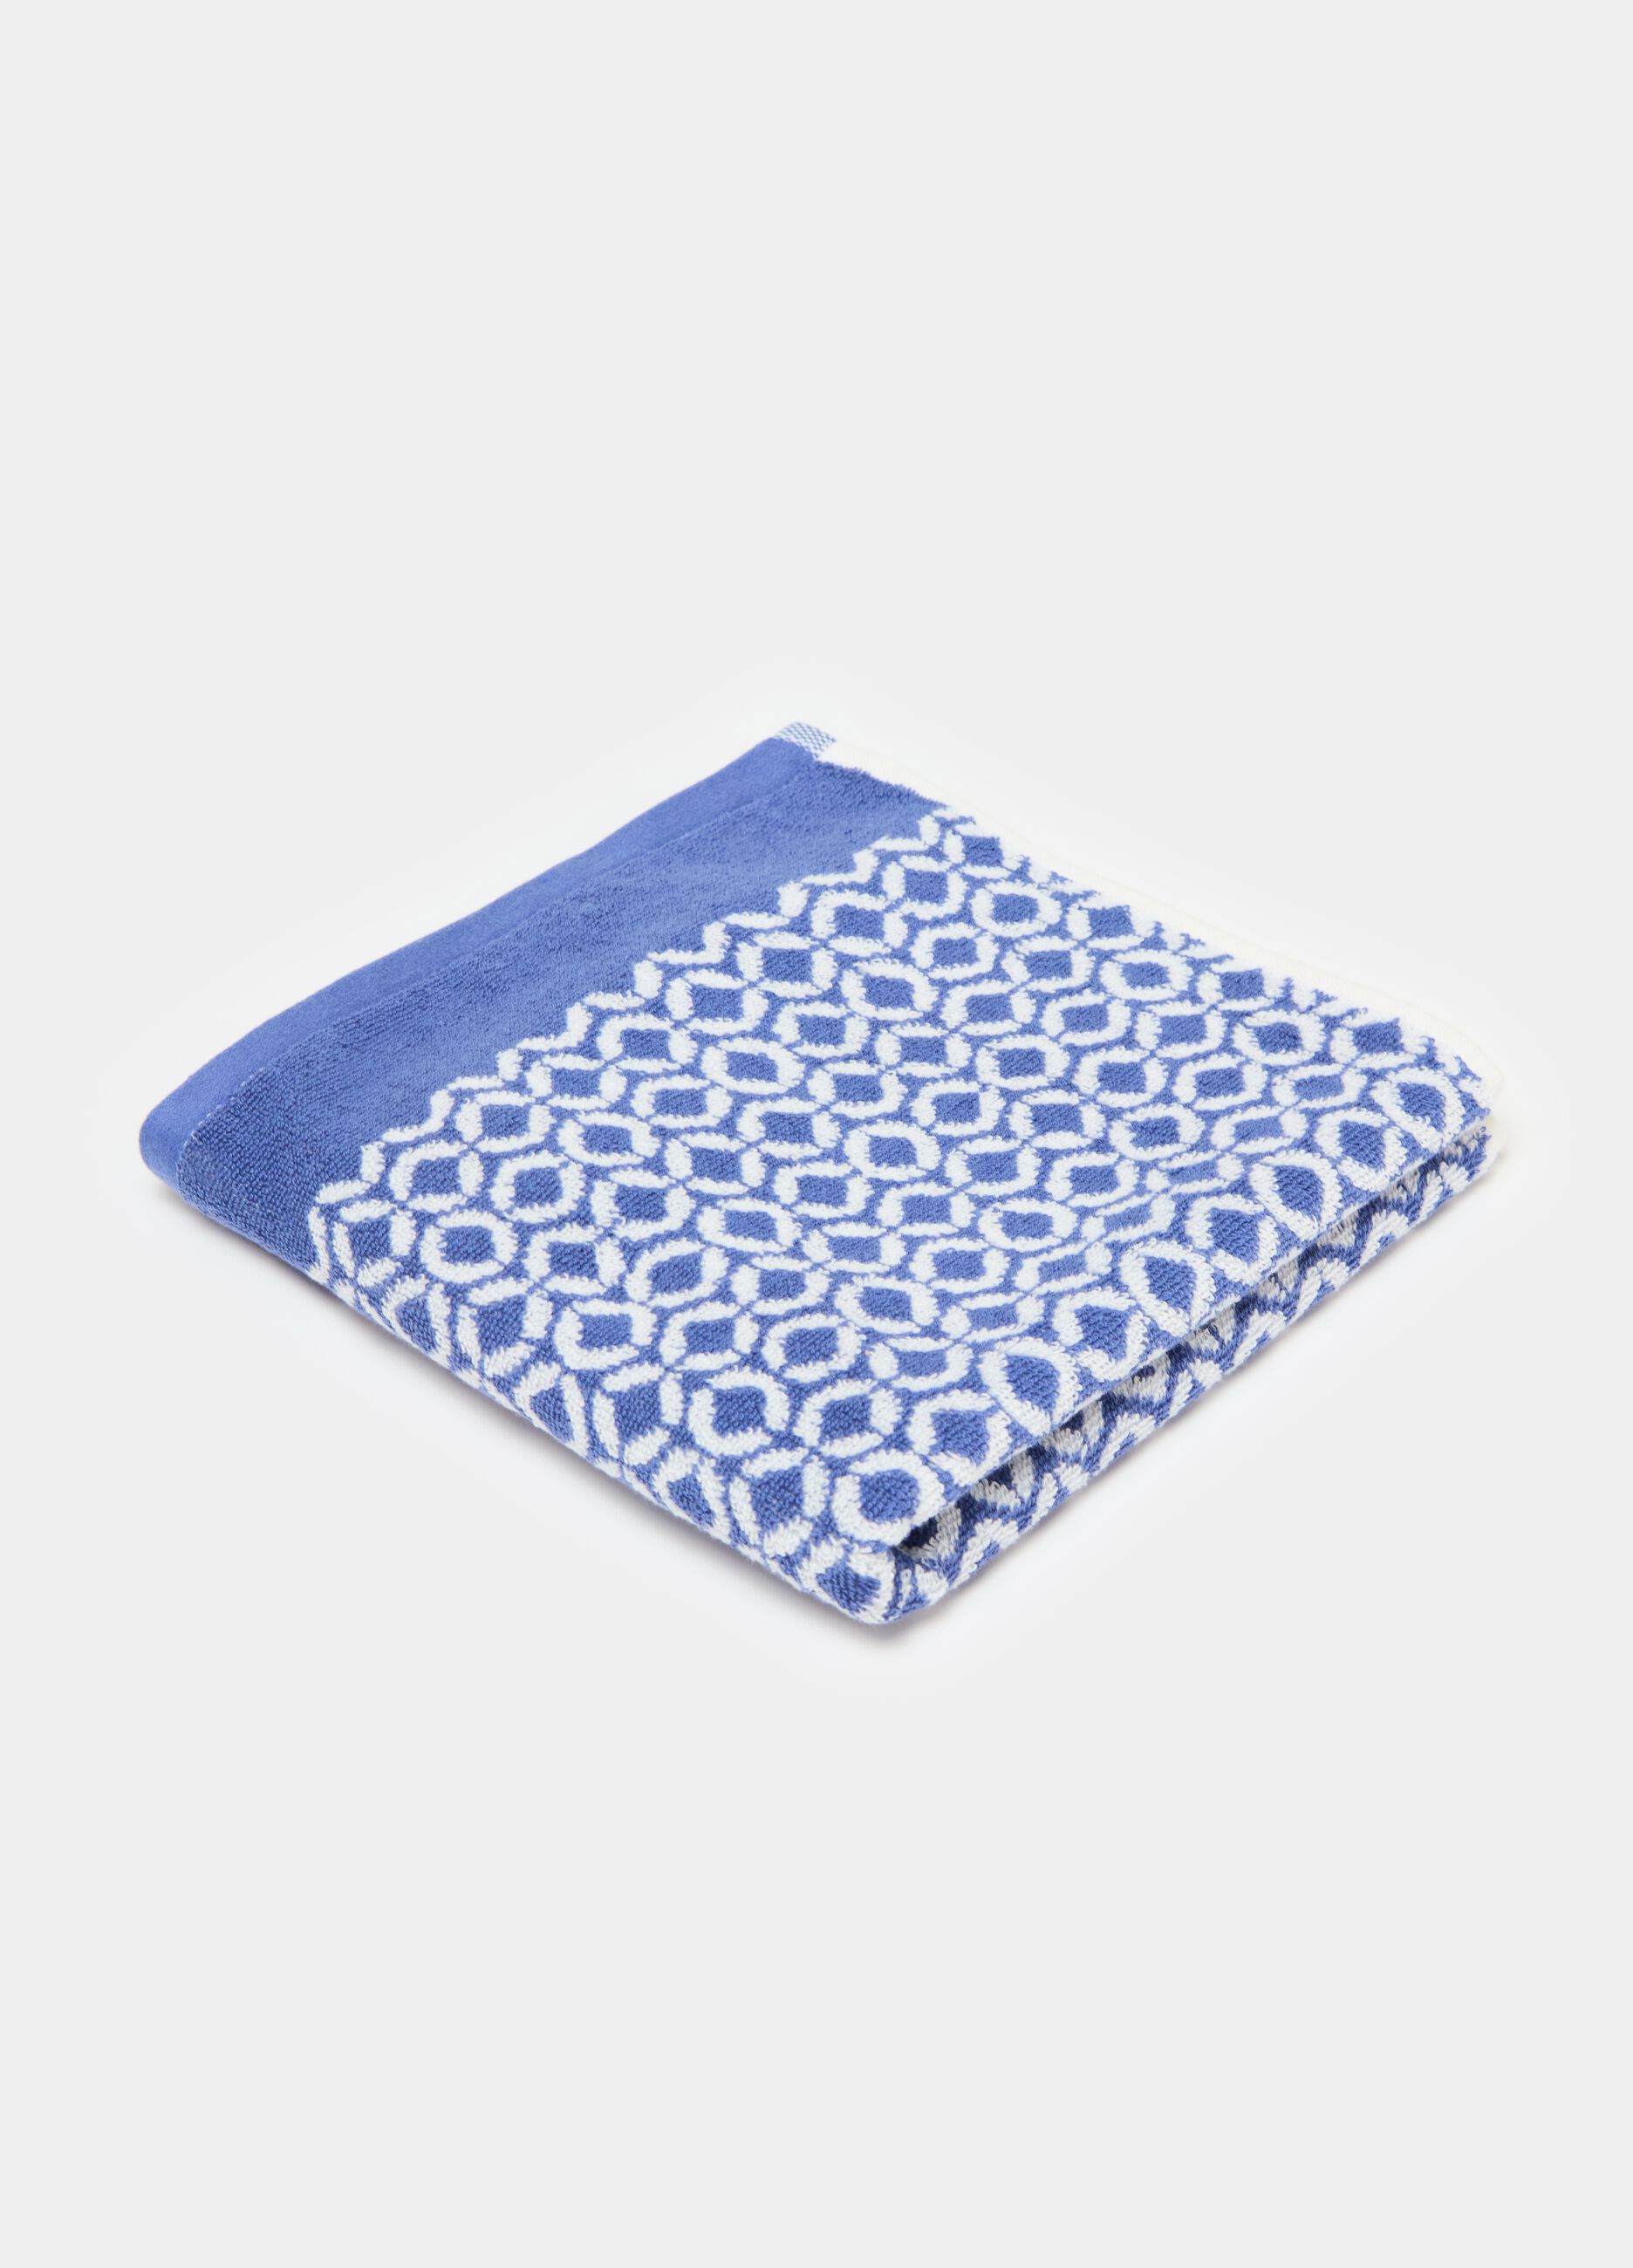 Face towel with dots pattern